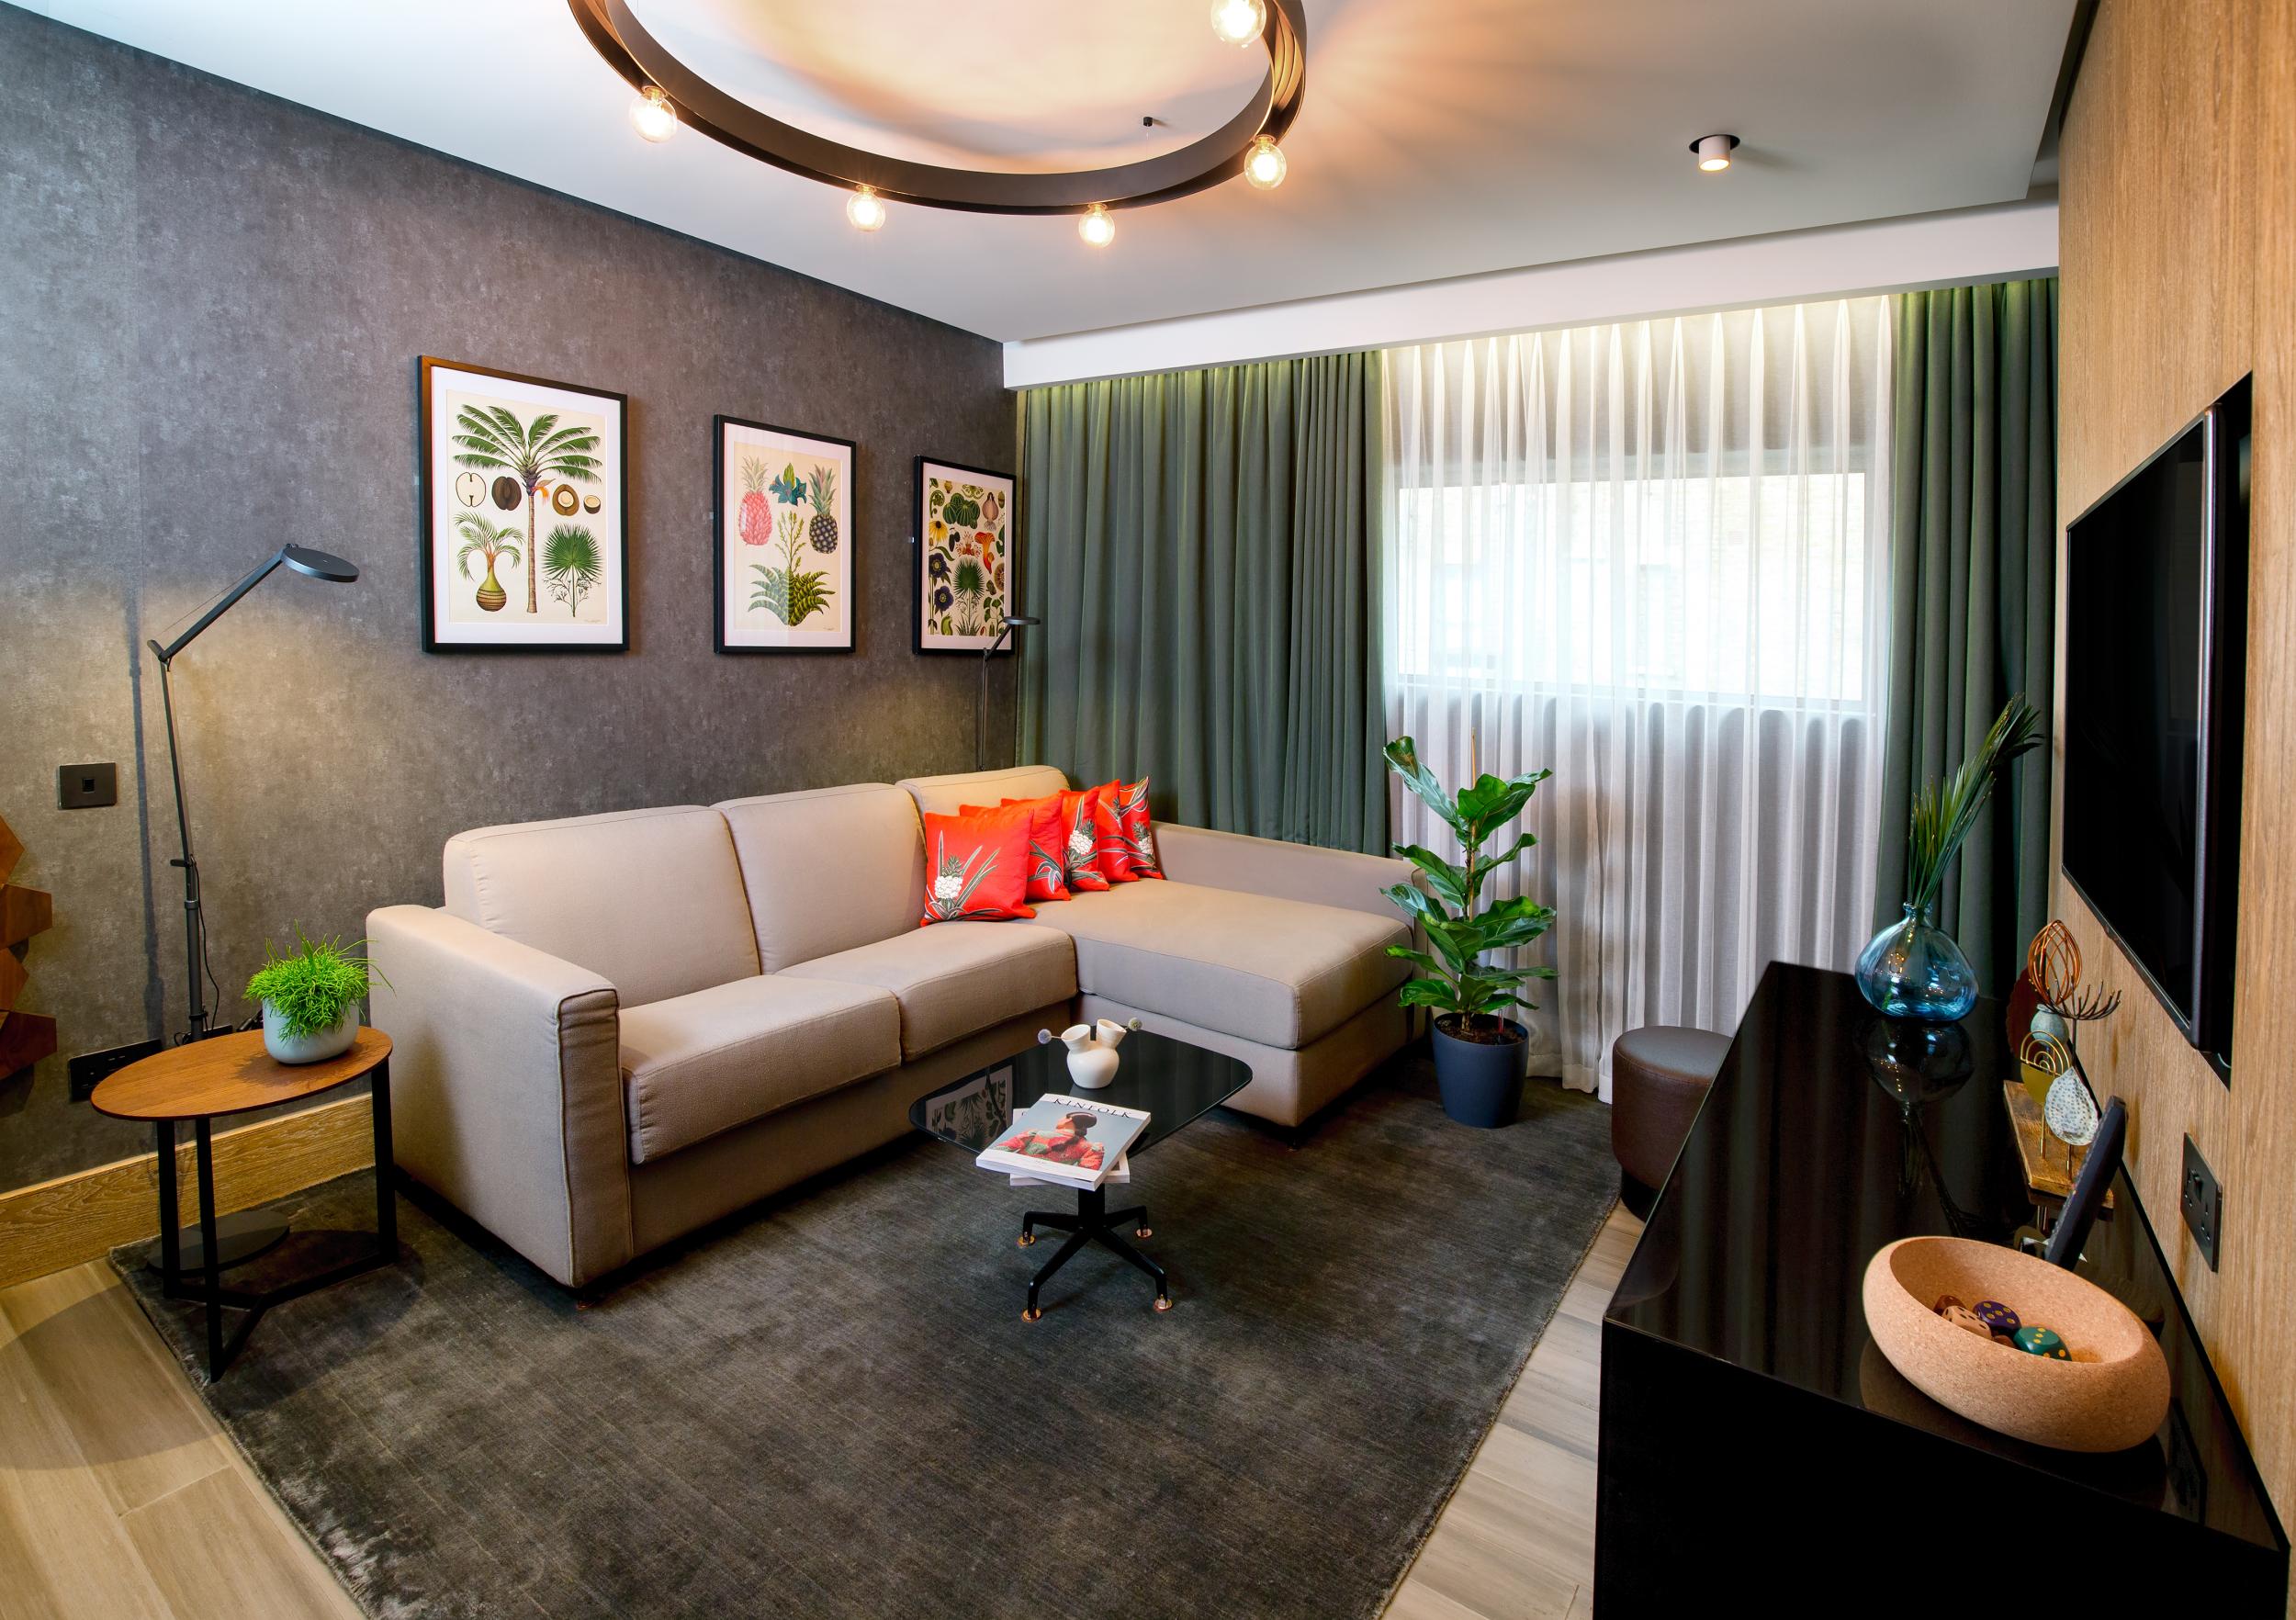 The suite uses vegan materials, such as piñatex for the cushions